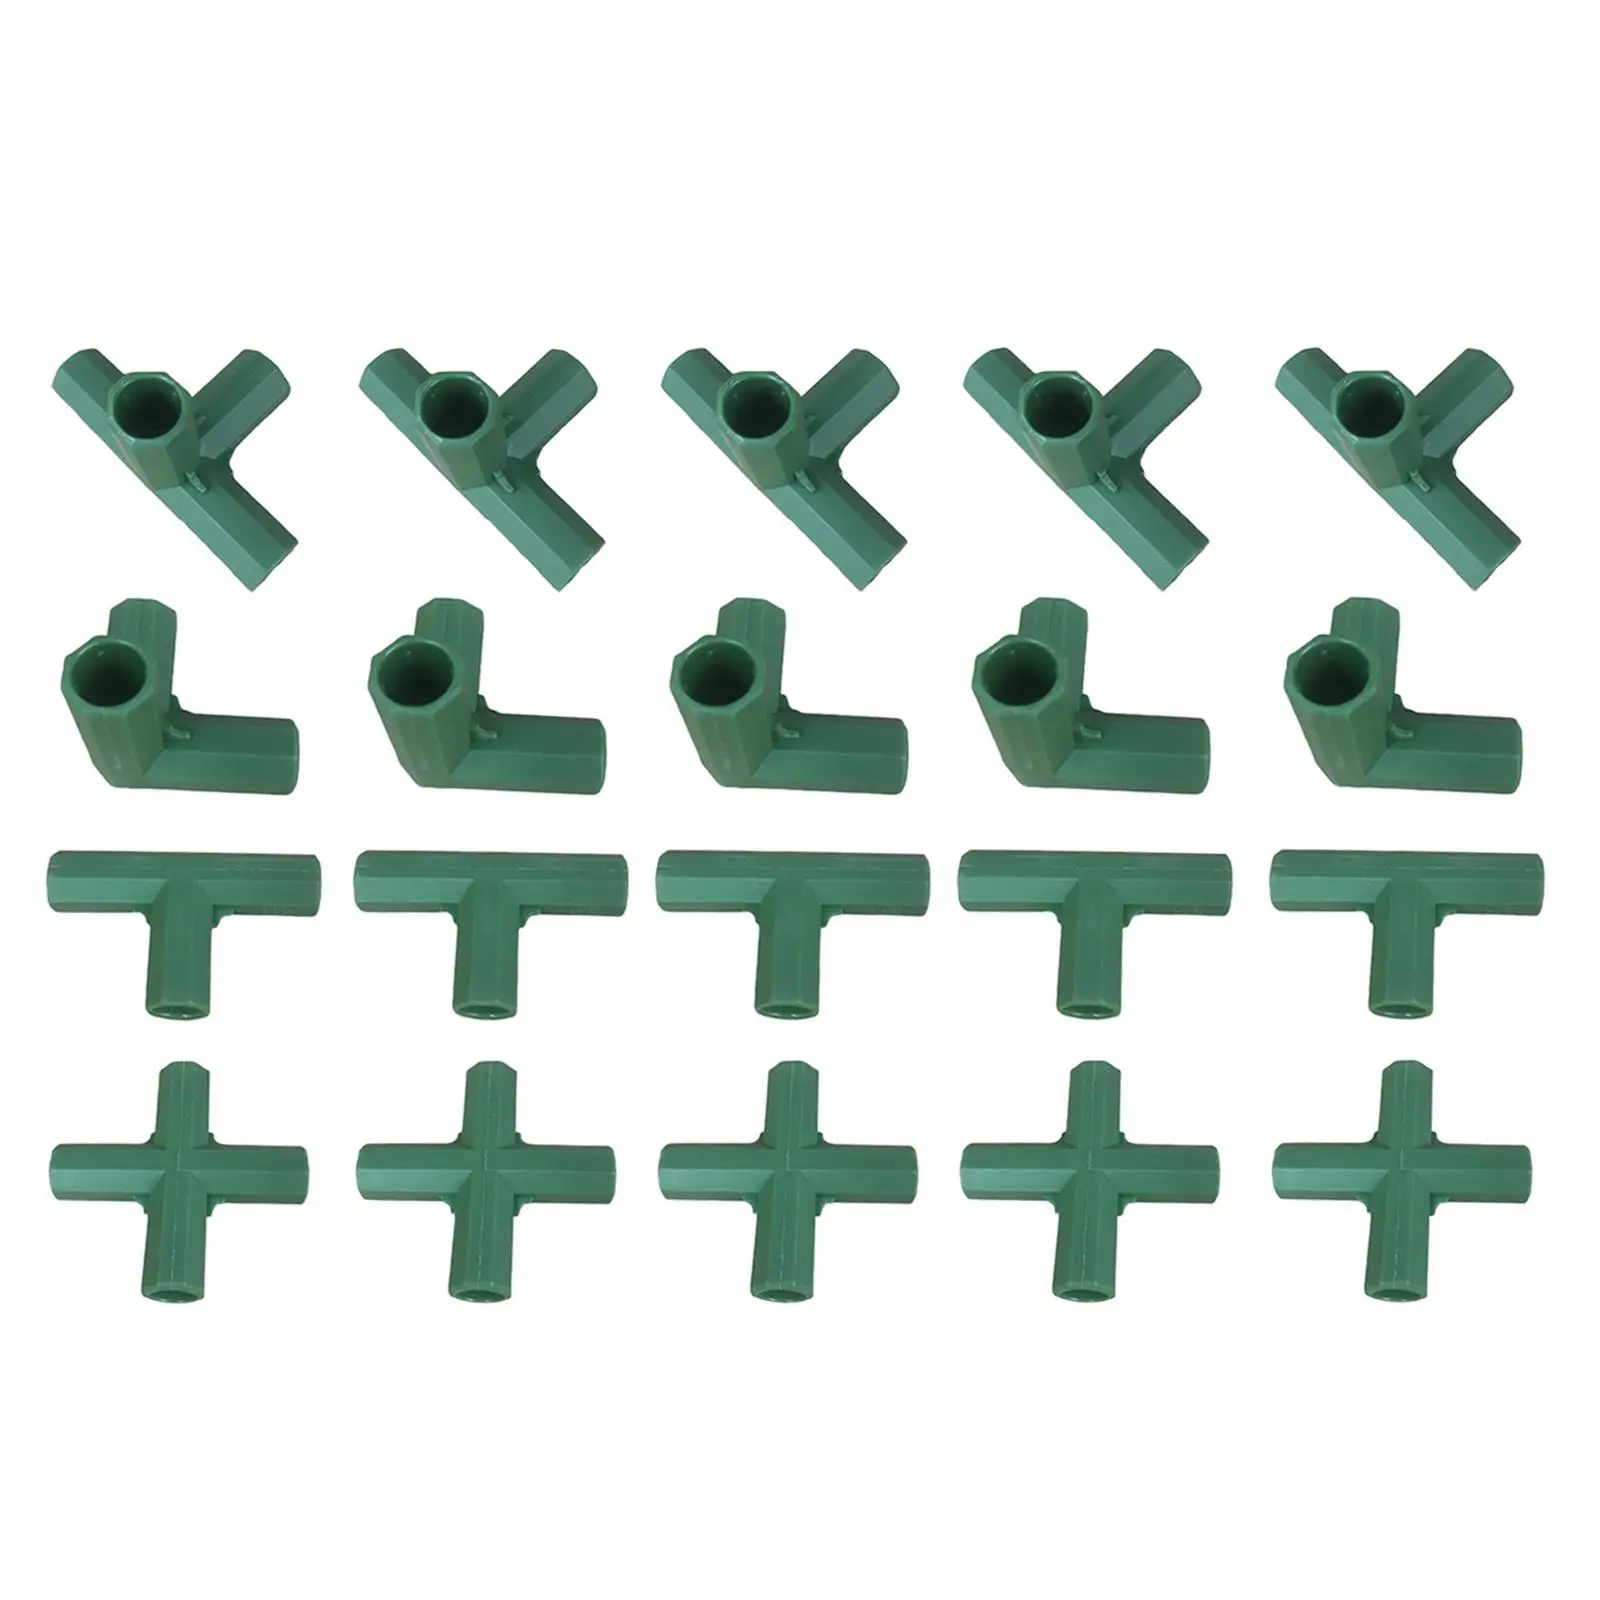 Set of 20 Durable Green Plastic Greenhouse Joints Gardening Awning Joints